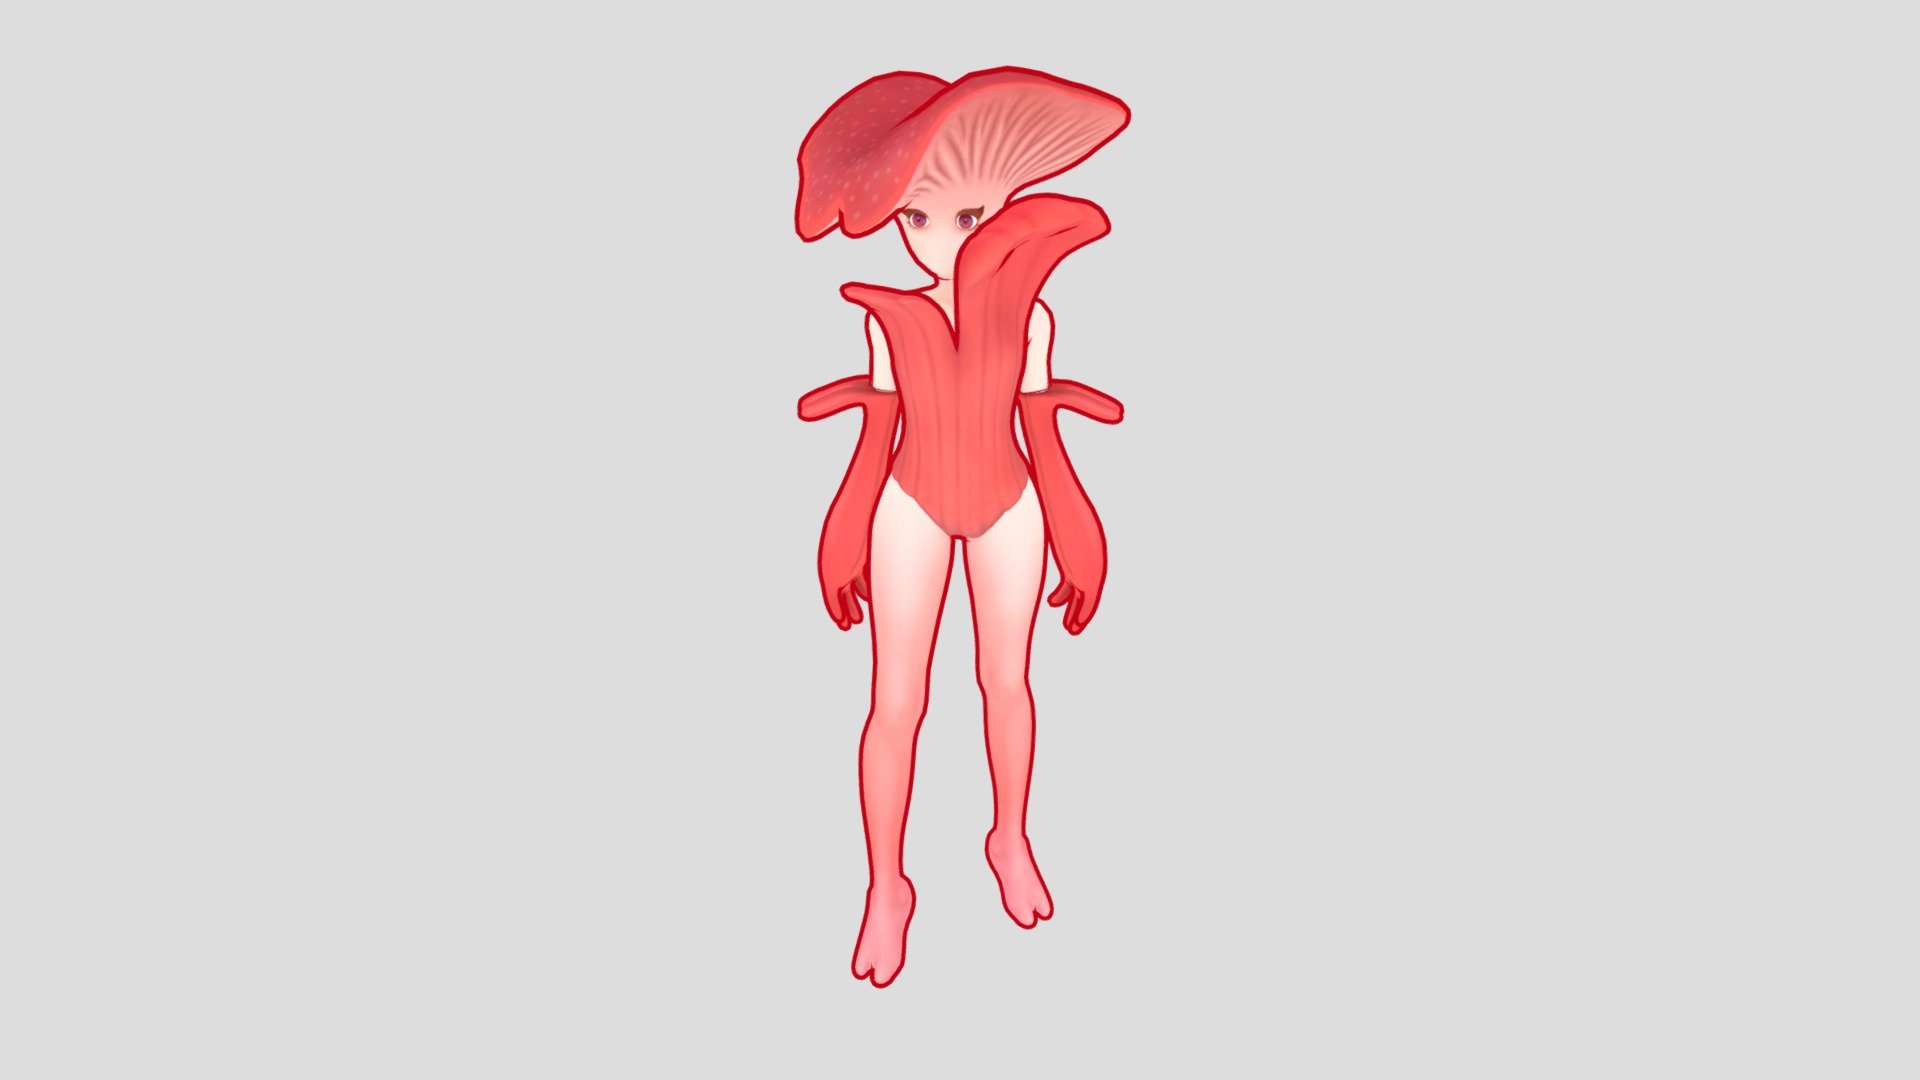 Mushroom character that was based off of a piece of art by feefal.
This was a way for me to mess around with making a toon outlined character that could be animated.
the character is fully rigged which gave me some interesting challenges. fun project.

Sculpted in Zbrush
Retopo / UVs in Maya
Textured in Substance Painter
Rigged / Posed in Blender - Mushroom - Download Free 3D model by Jo_Wee 3d model